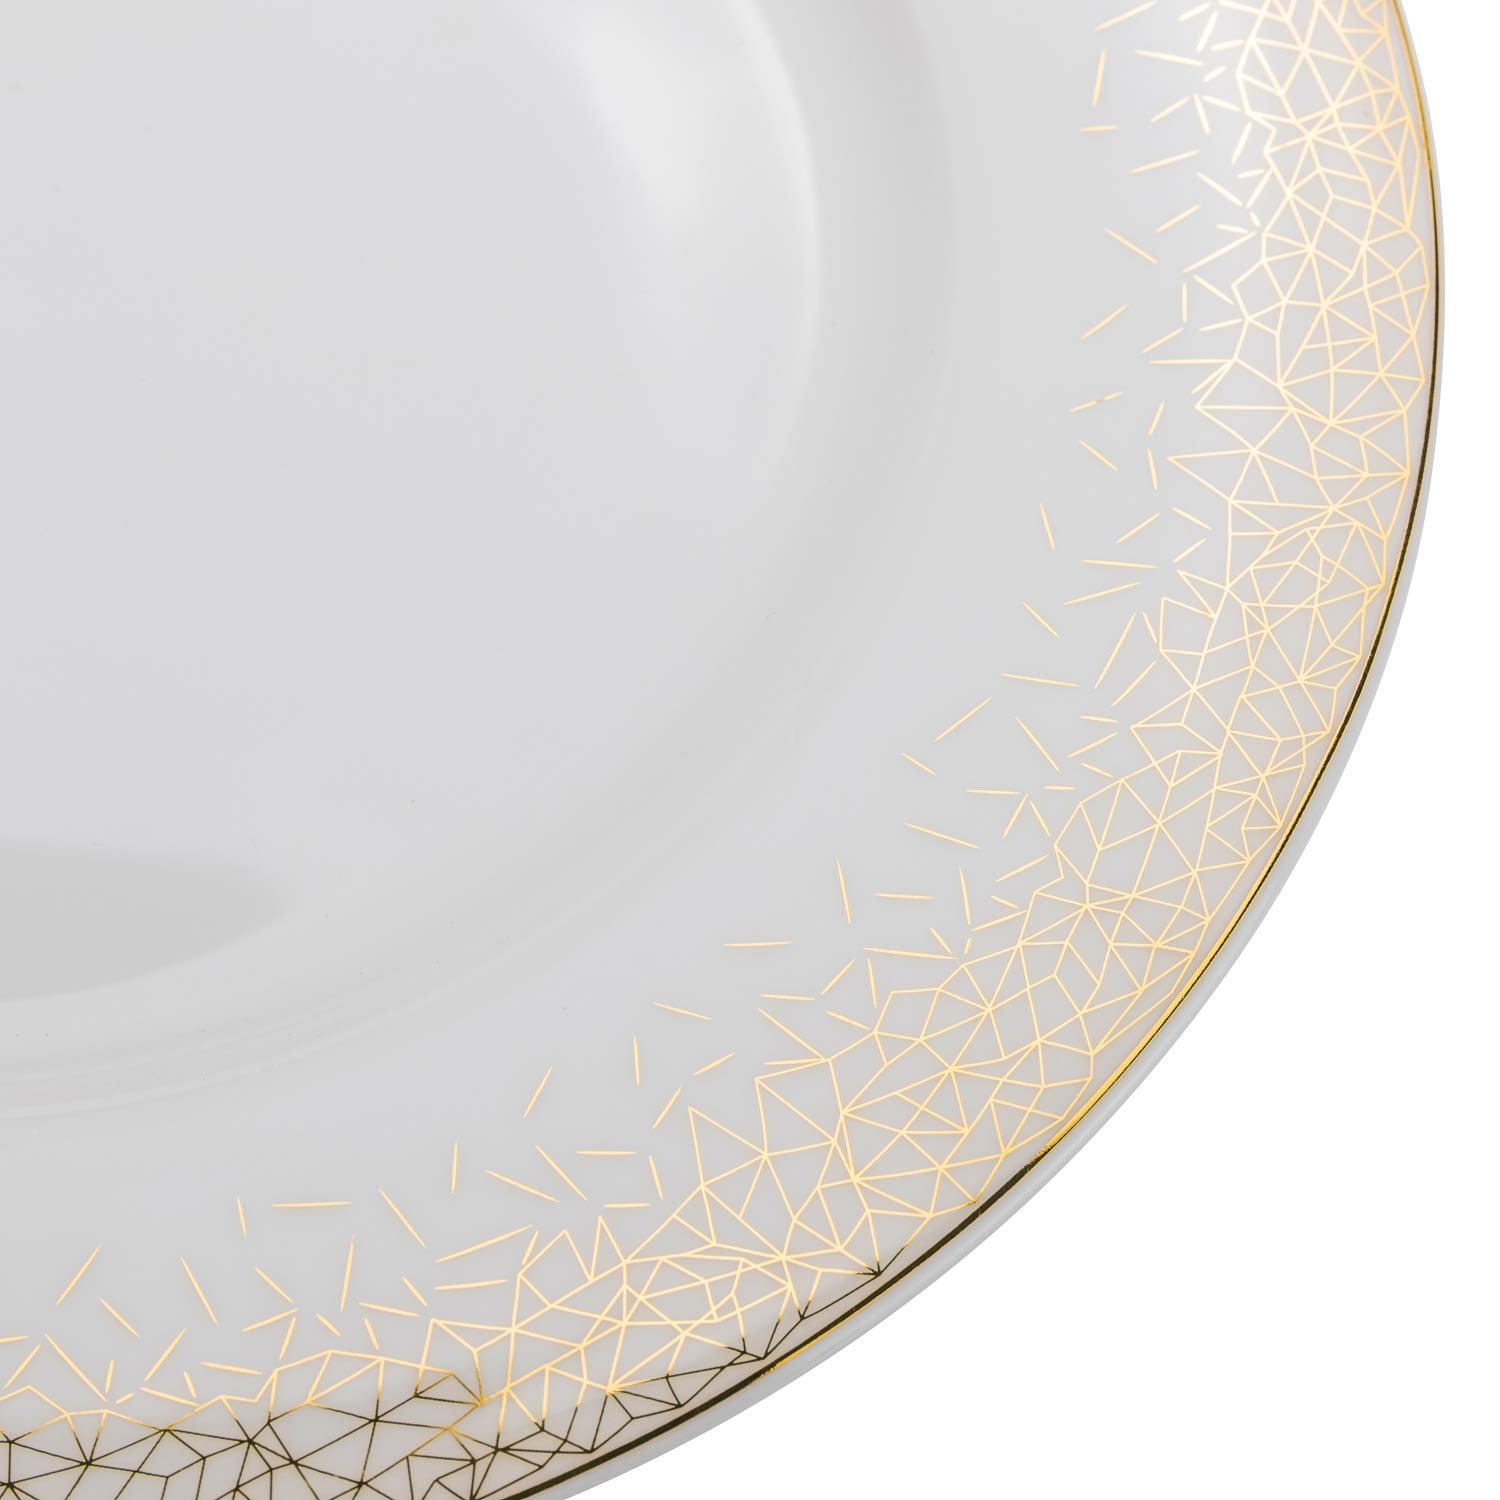 Euro Porcelain 5-Piece Dinner Set Service for 1, 24K Gold-plated Luxury Bone China Tableware - image 3 of 3